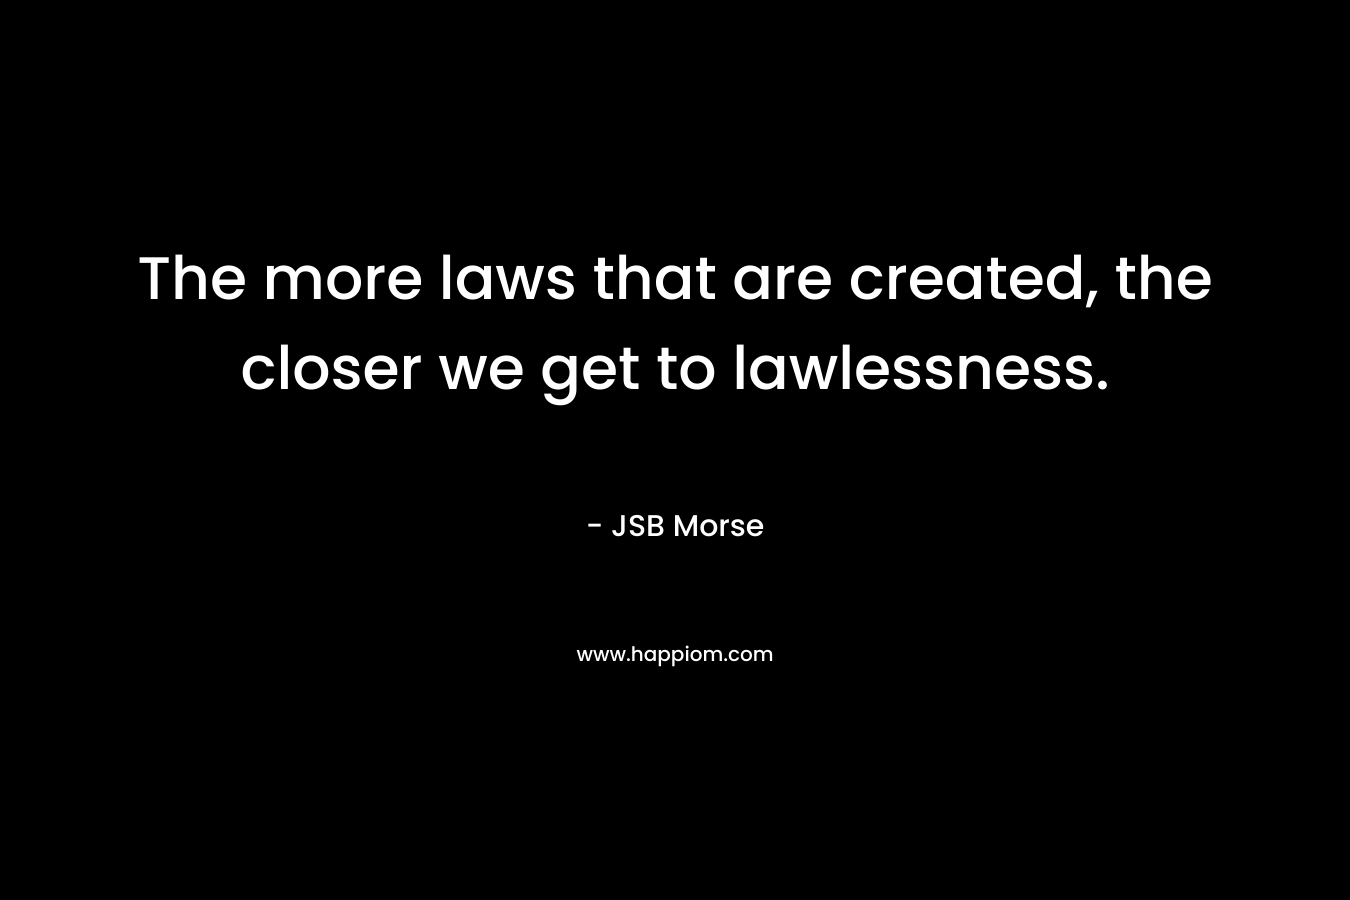 The more laws that are created, the closer we get to lawlessness.